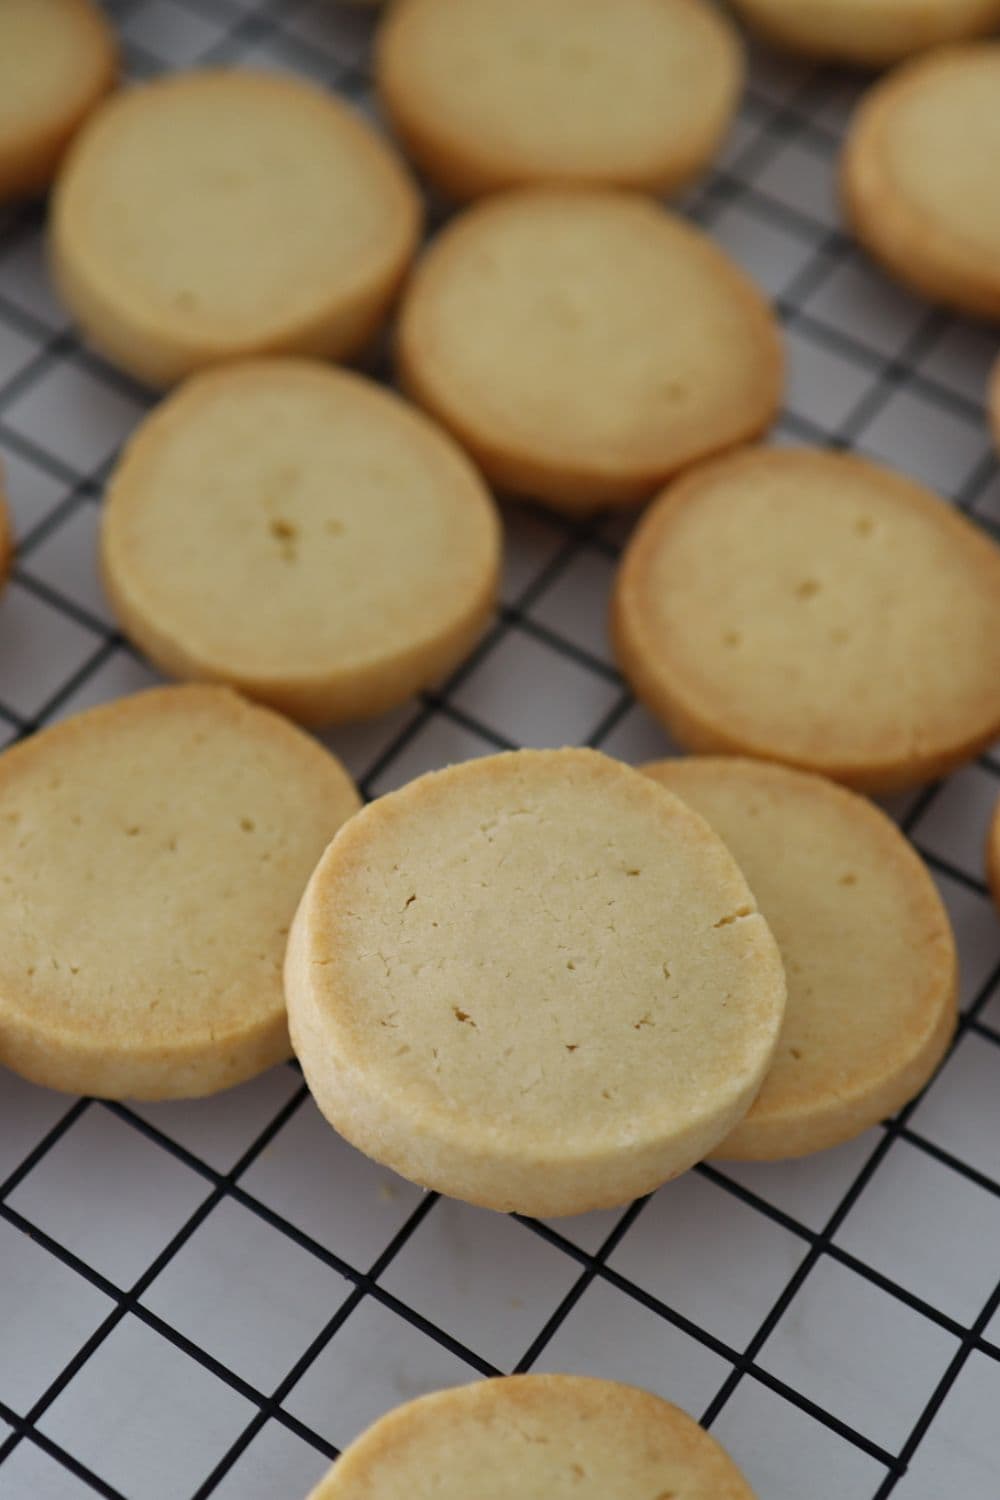 Need shortbread recipe for mold pans